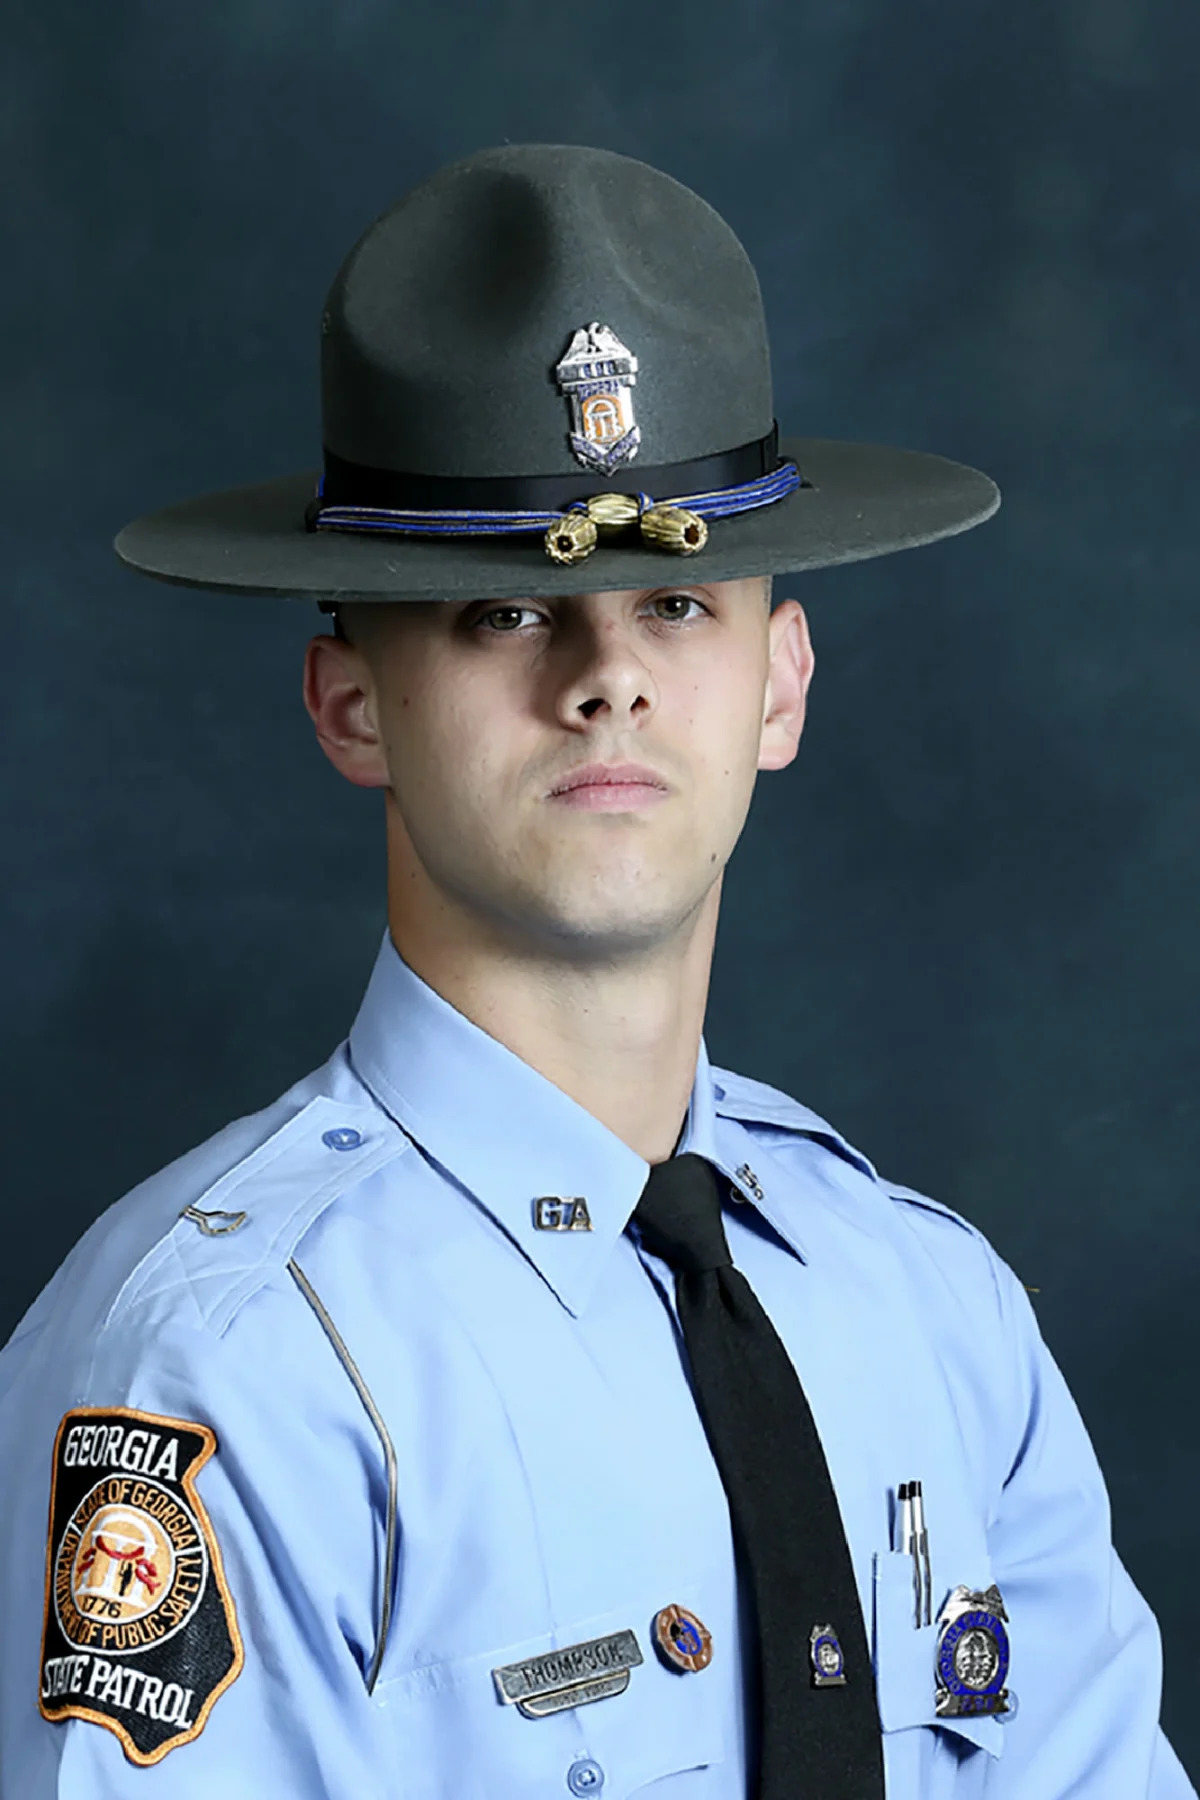 Georgia to pay $4.8M in state trooper's killing of Black man